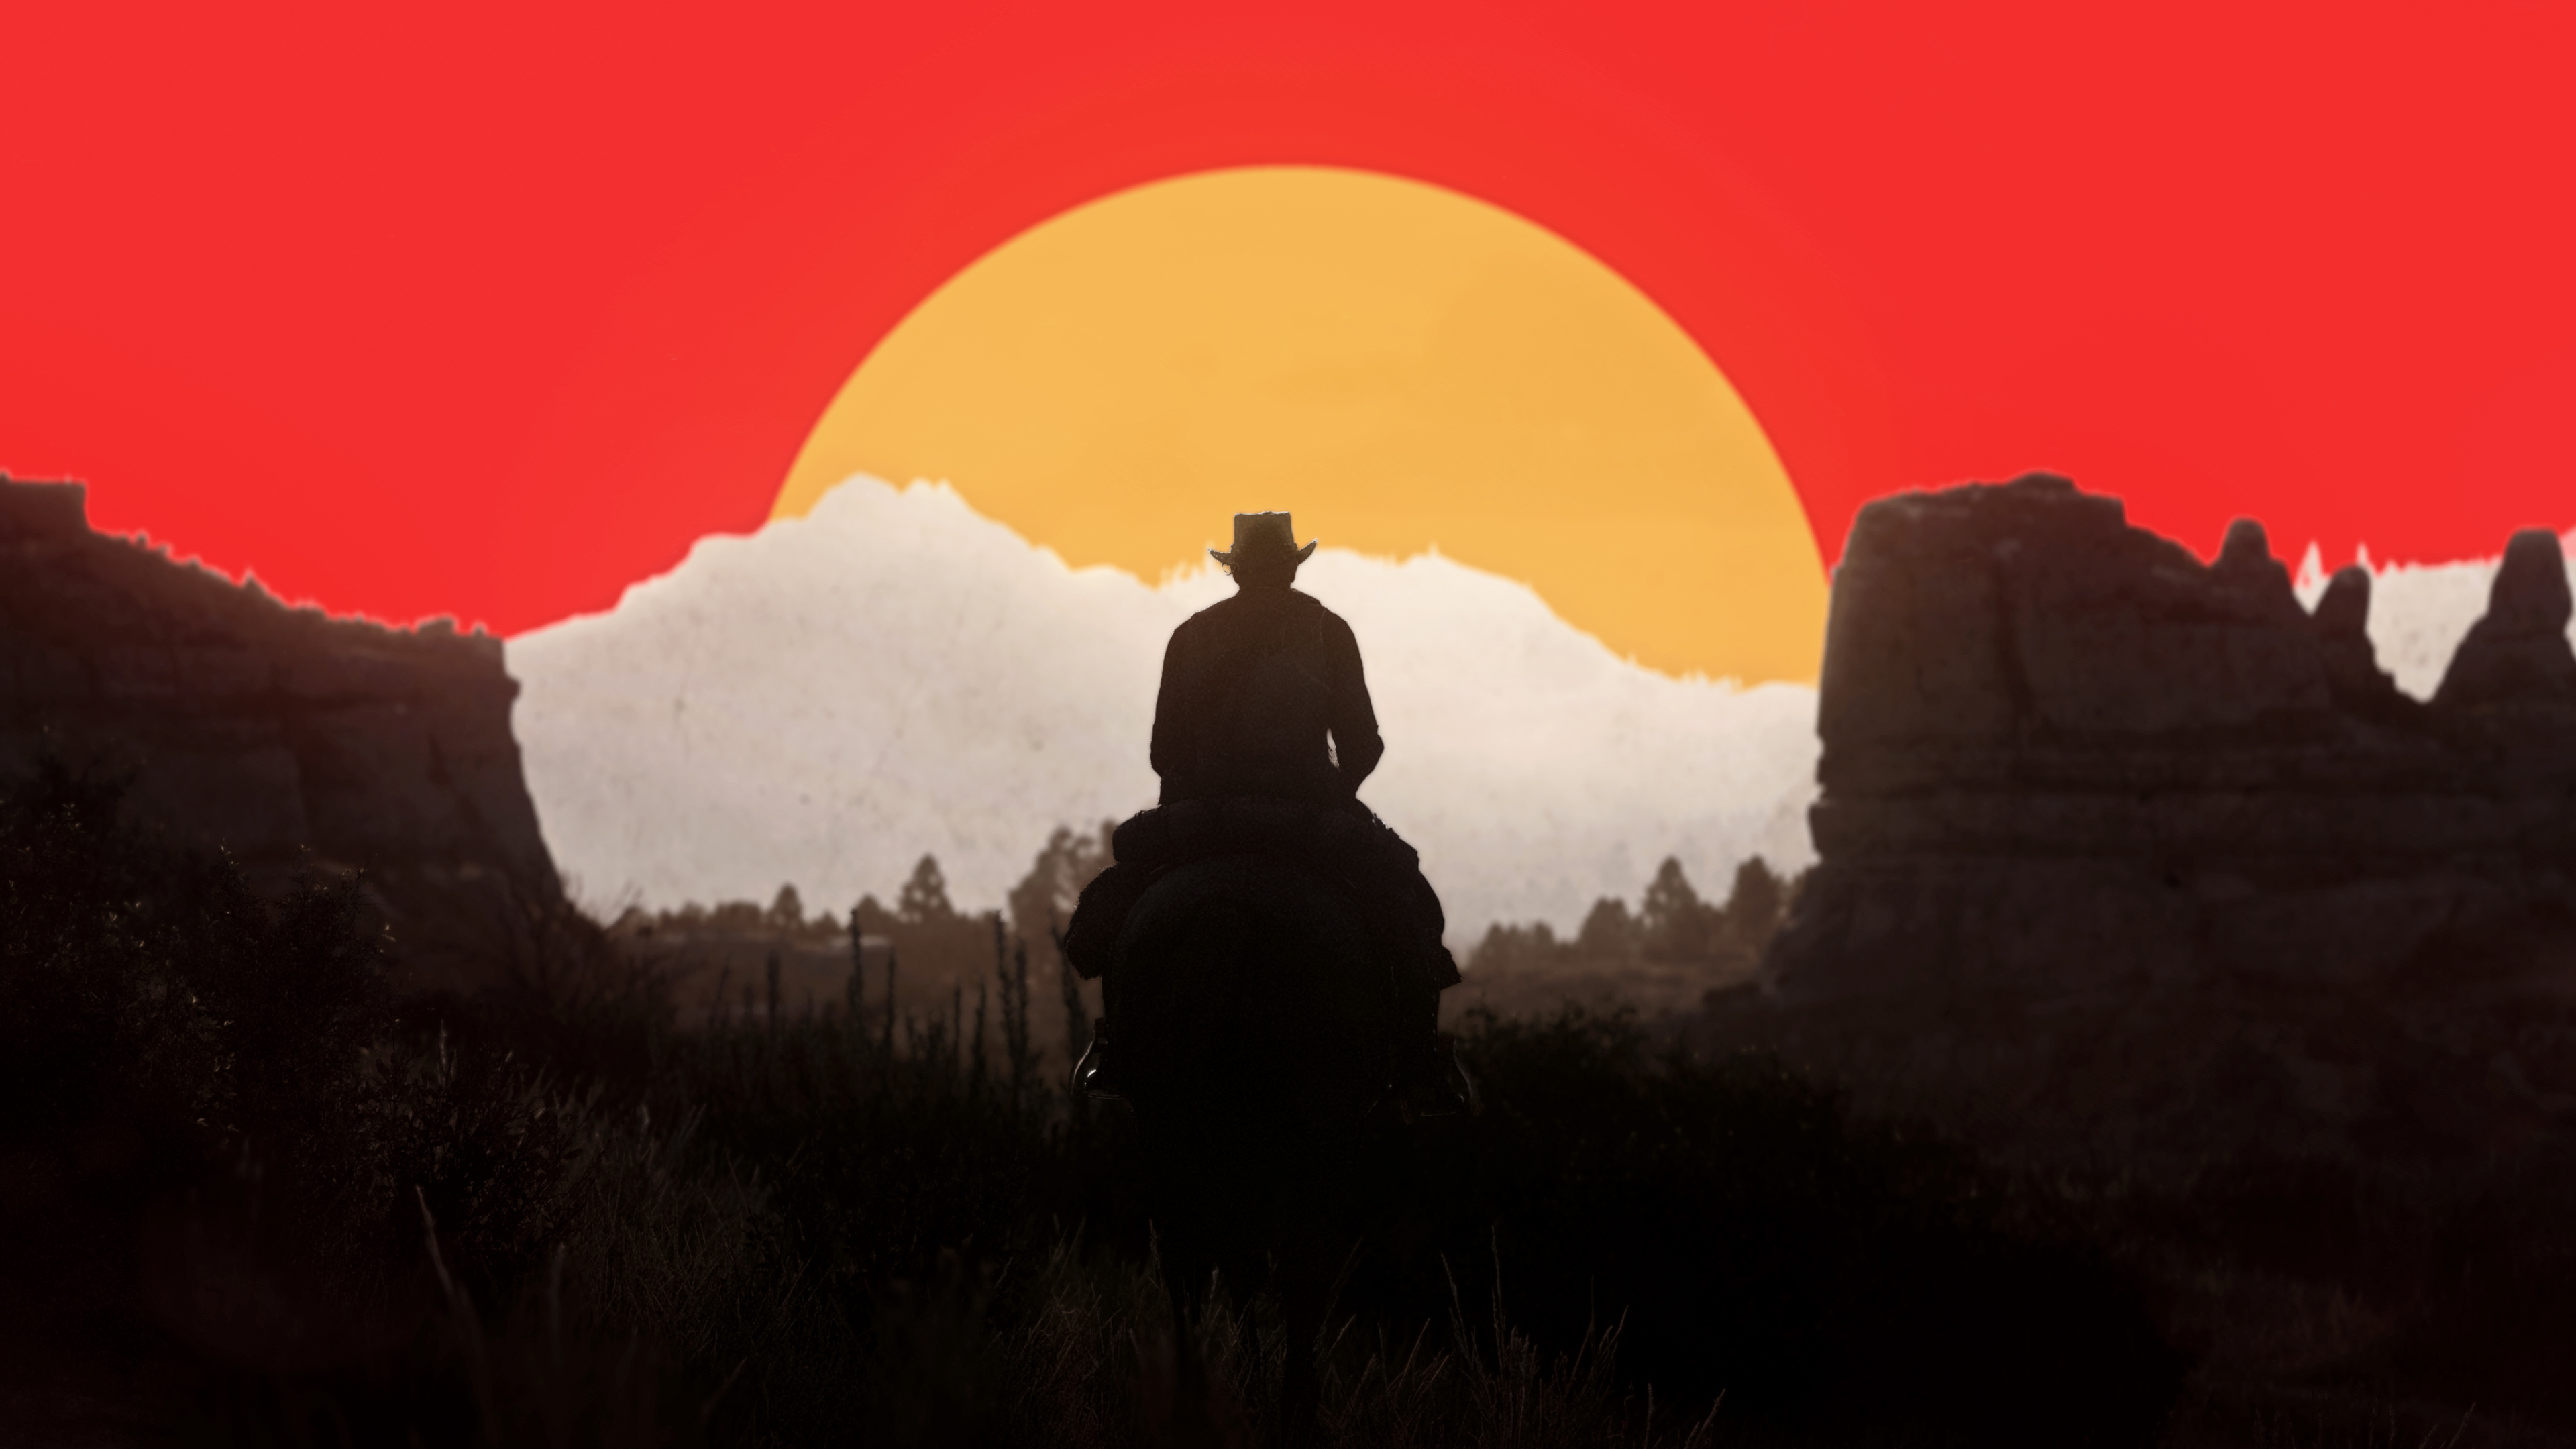 Wallpaper 4k Red Dead Redemption 2 The Path Wallpaper